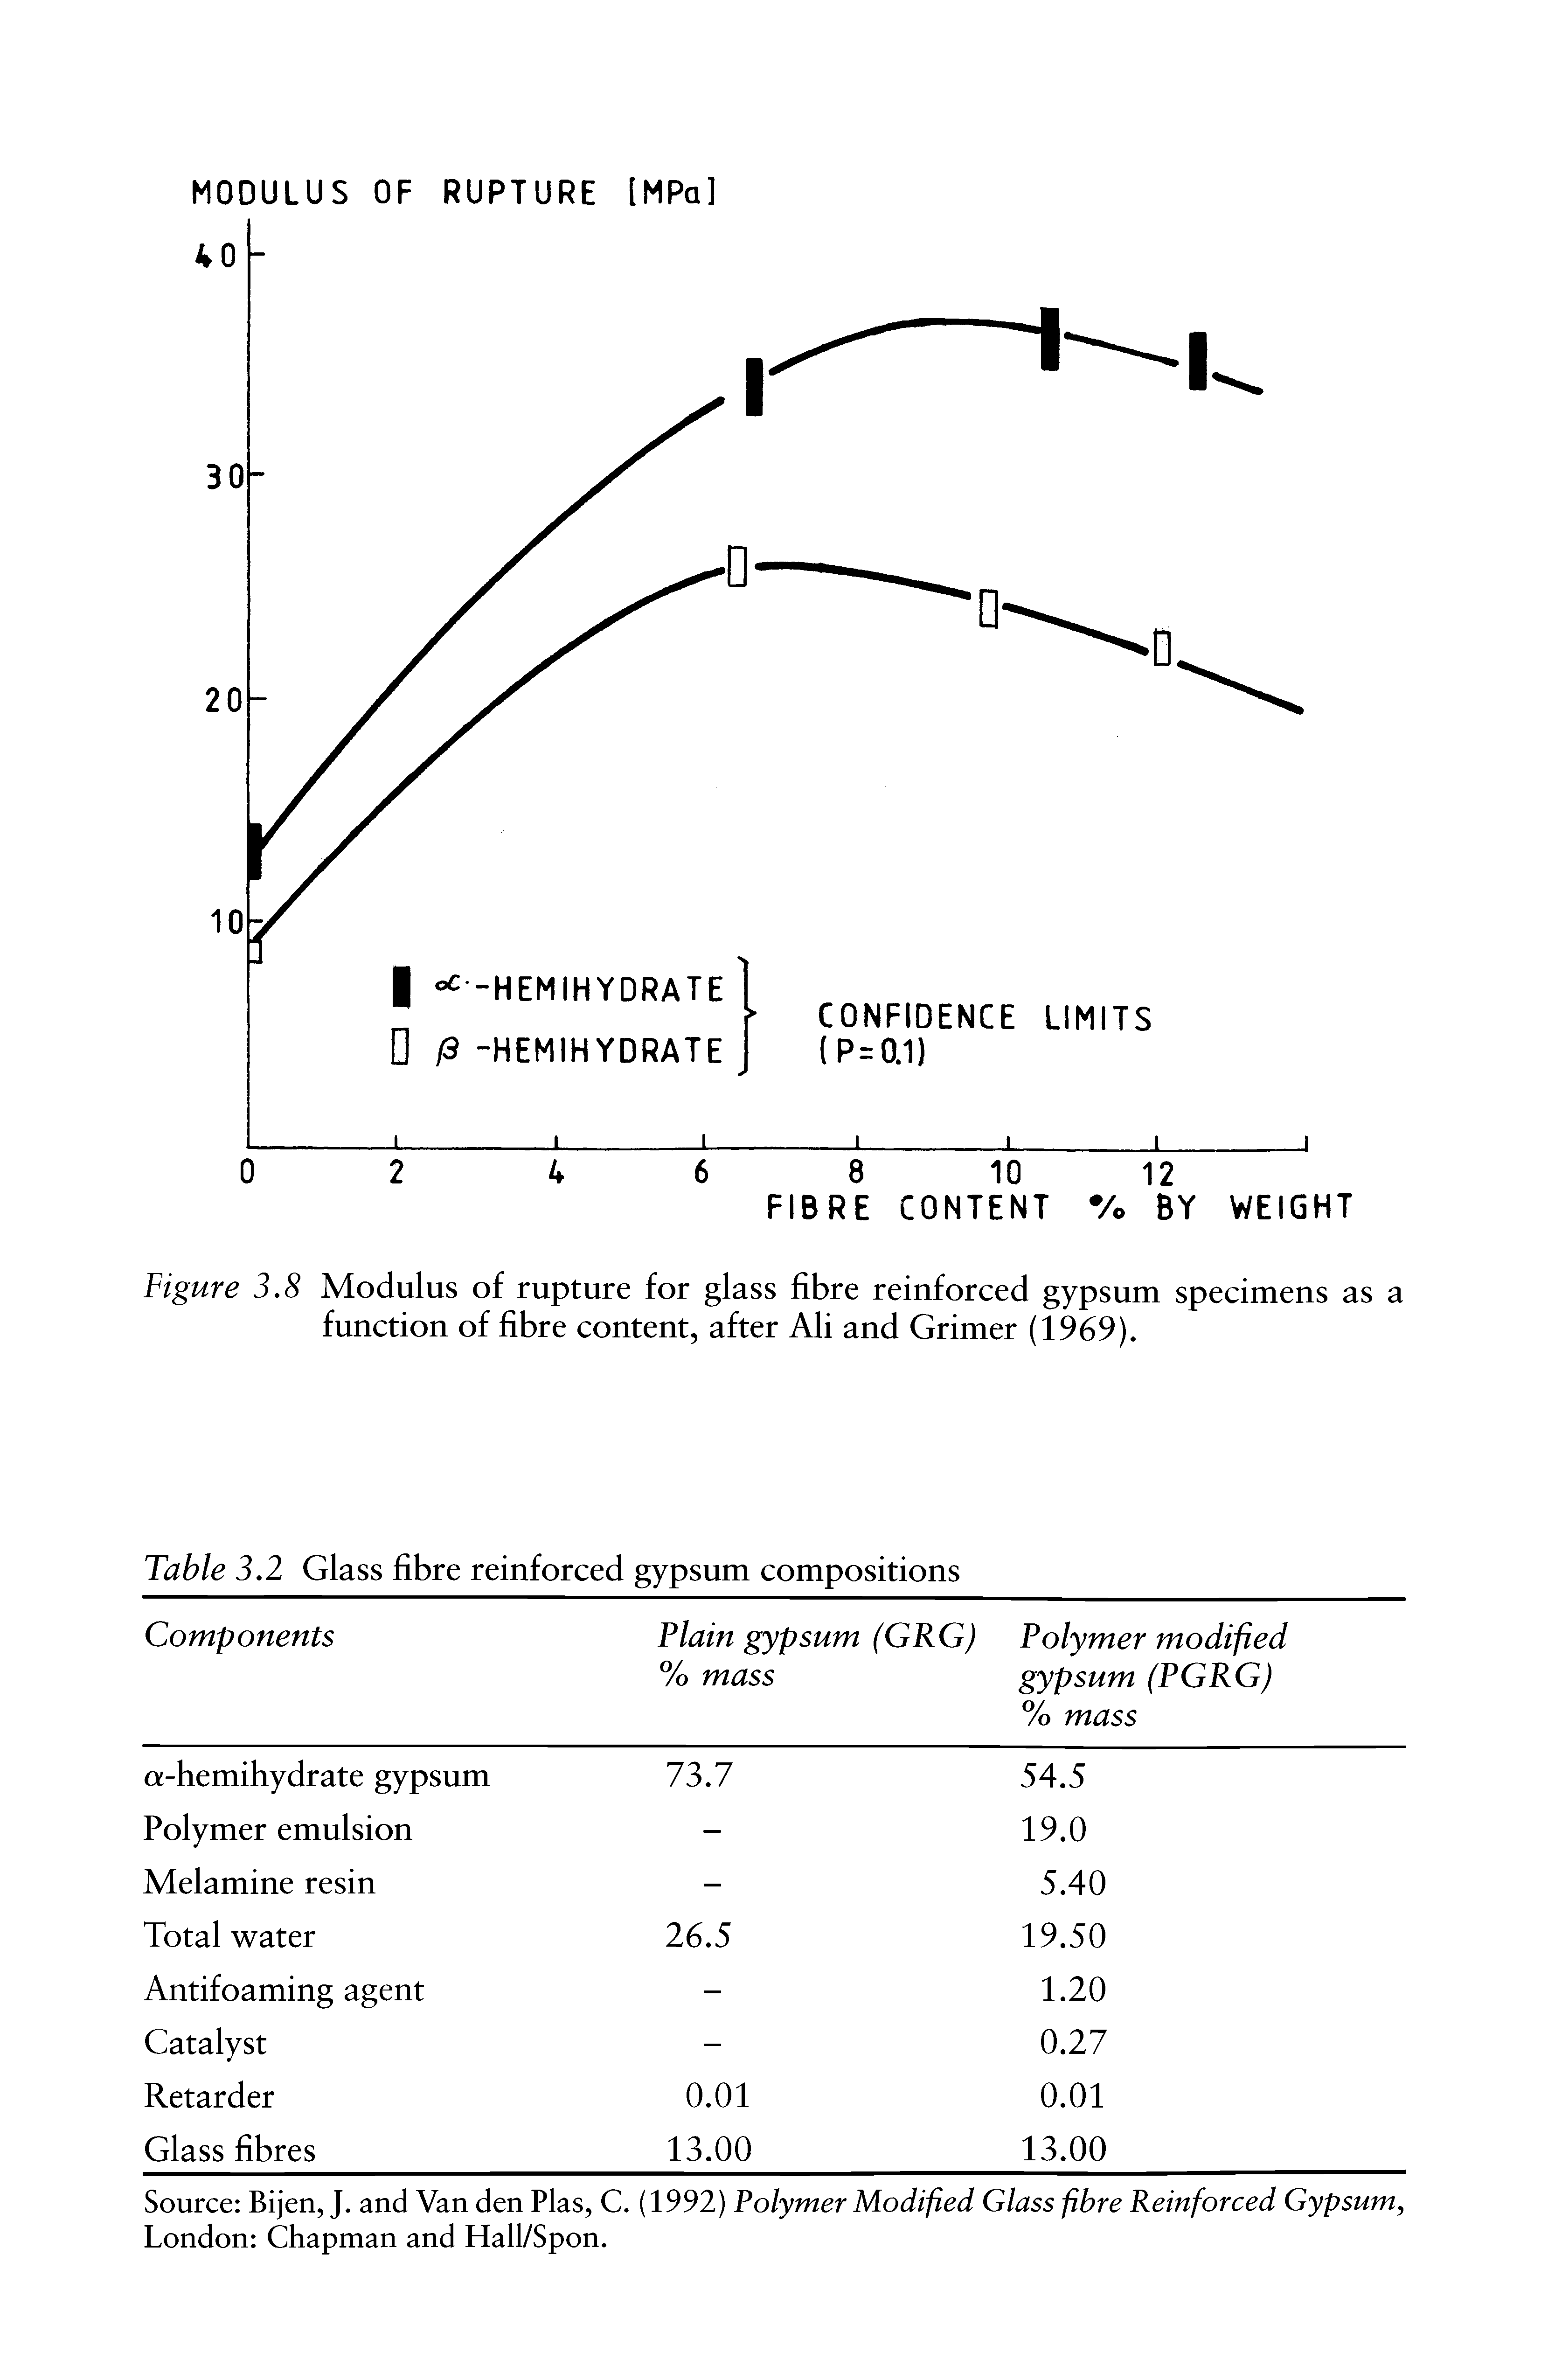 Figure 3.8 Modulus of rupture for glass fibre reinforced gypsum specimens as a function of fibre content, after Ali and Grimer (1969).